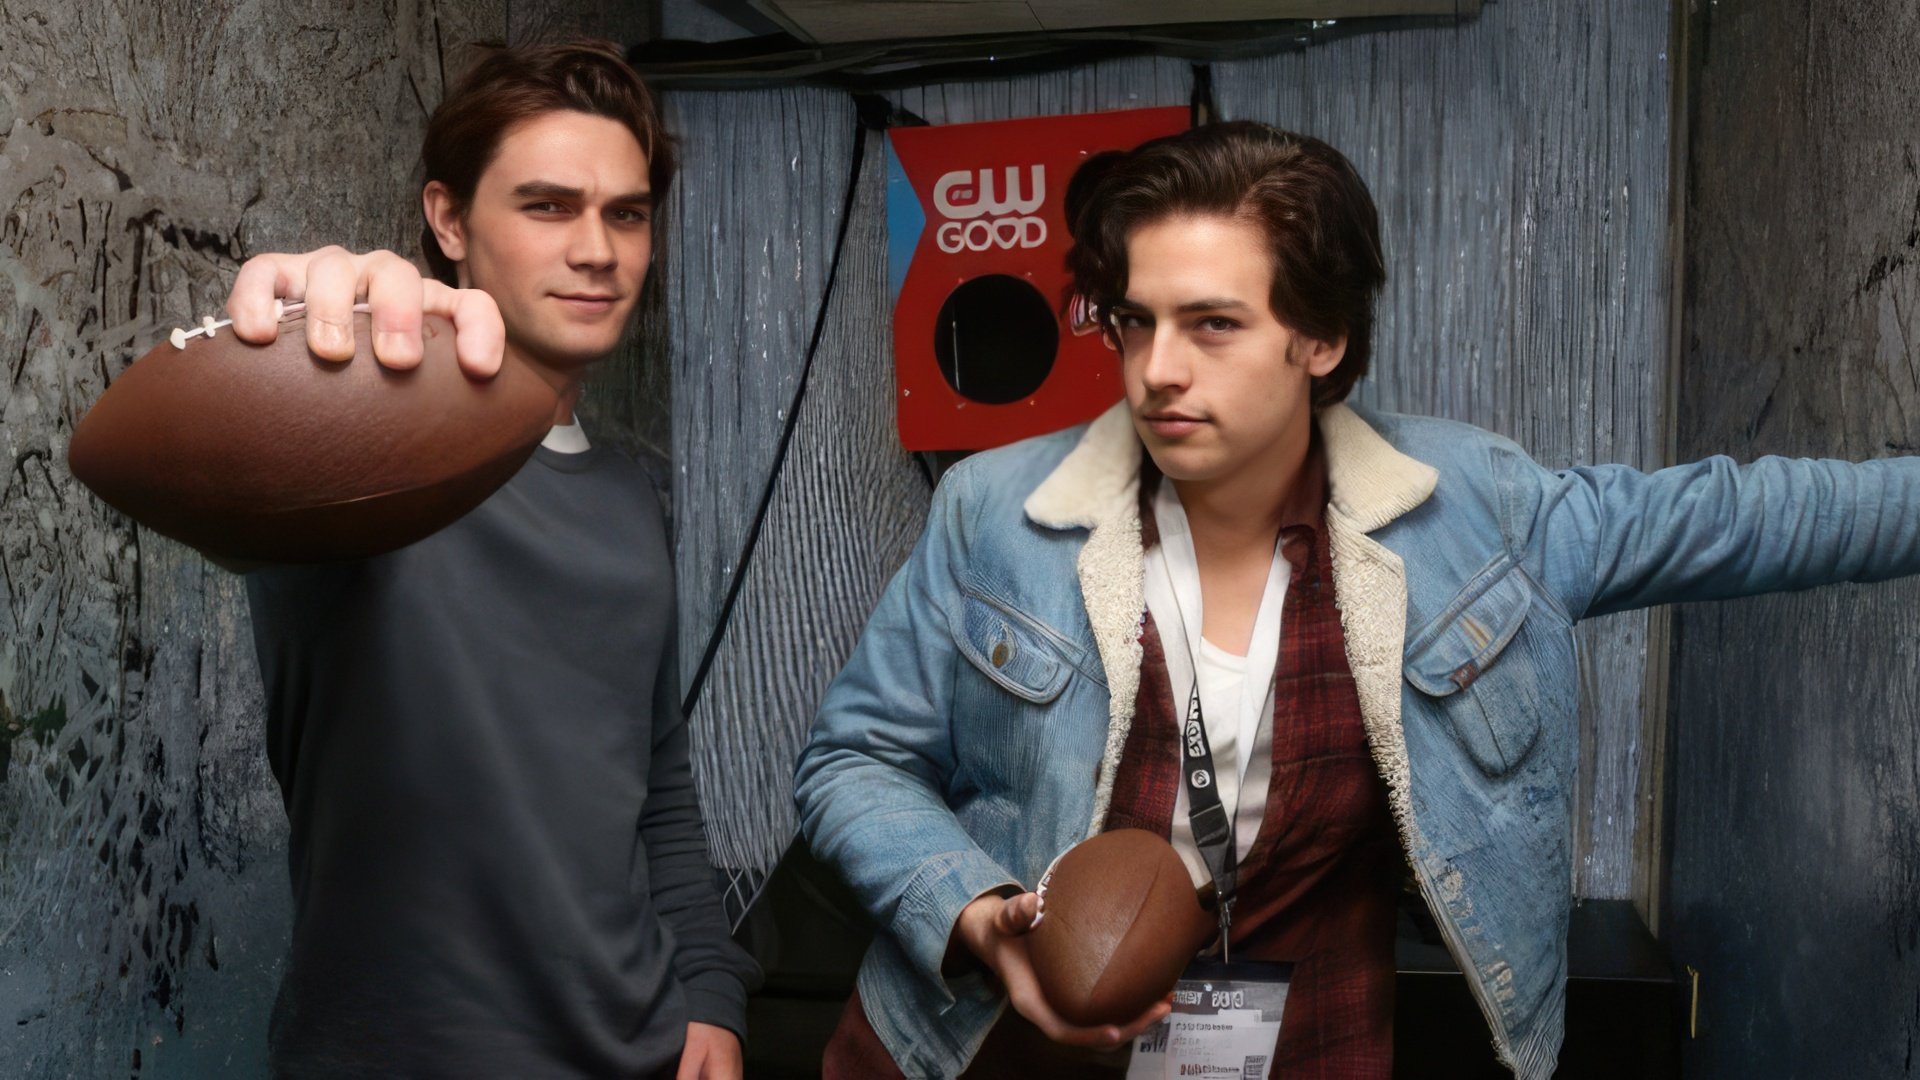 The Riverdale cast: Cole Sprouse and KJ Apa